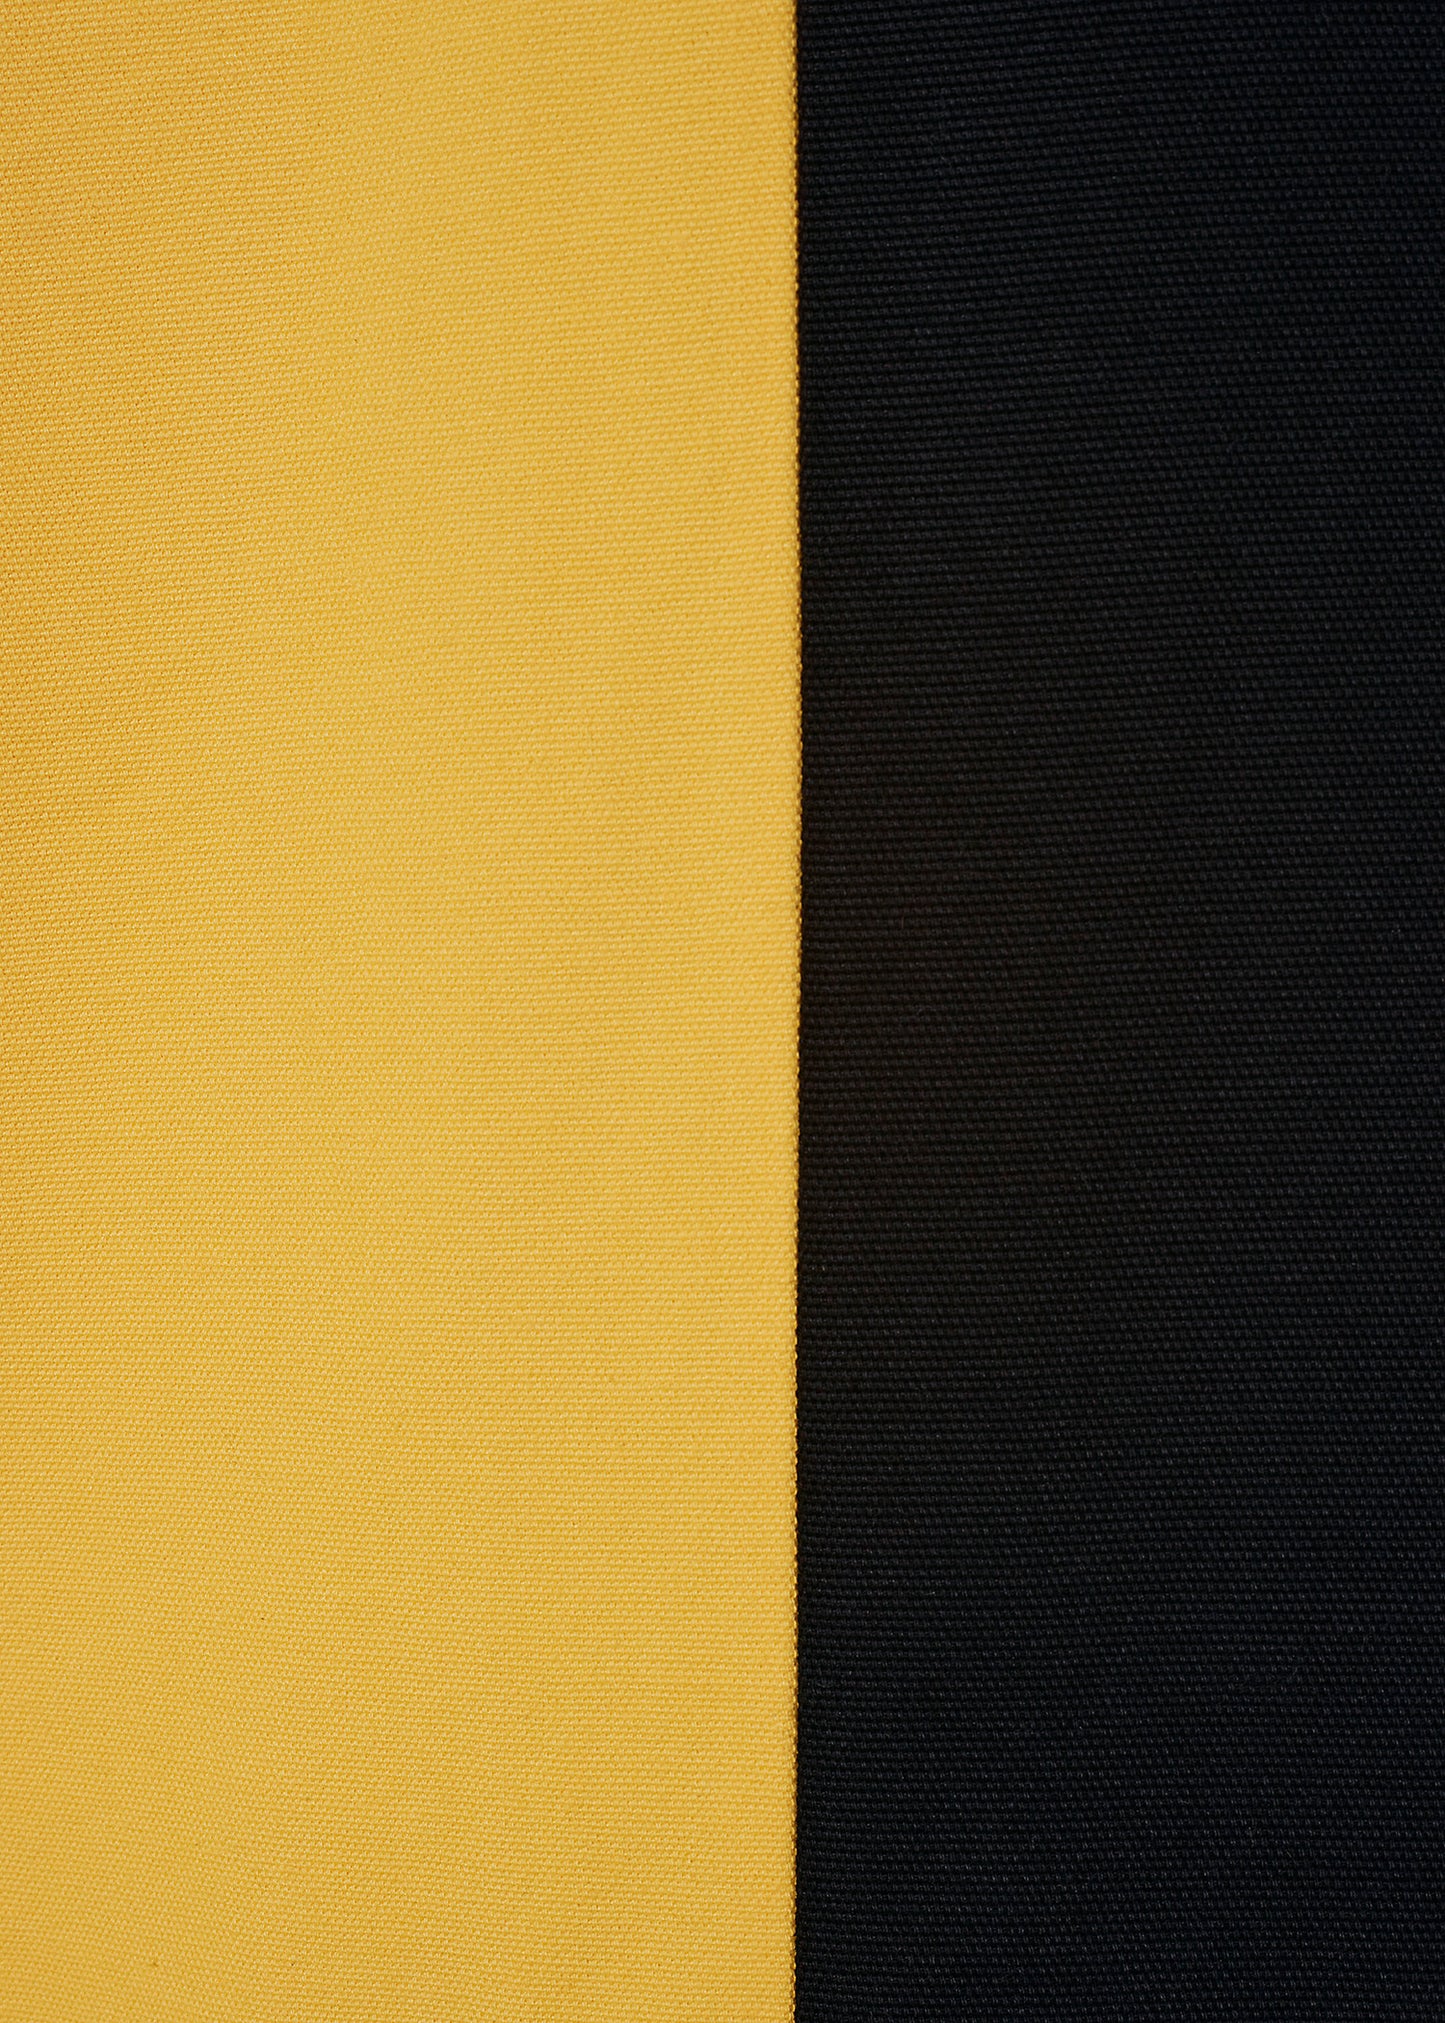 Sofa Cover – Black and Yellow